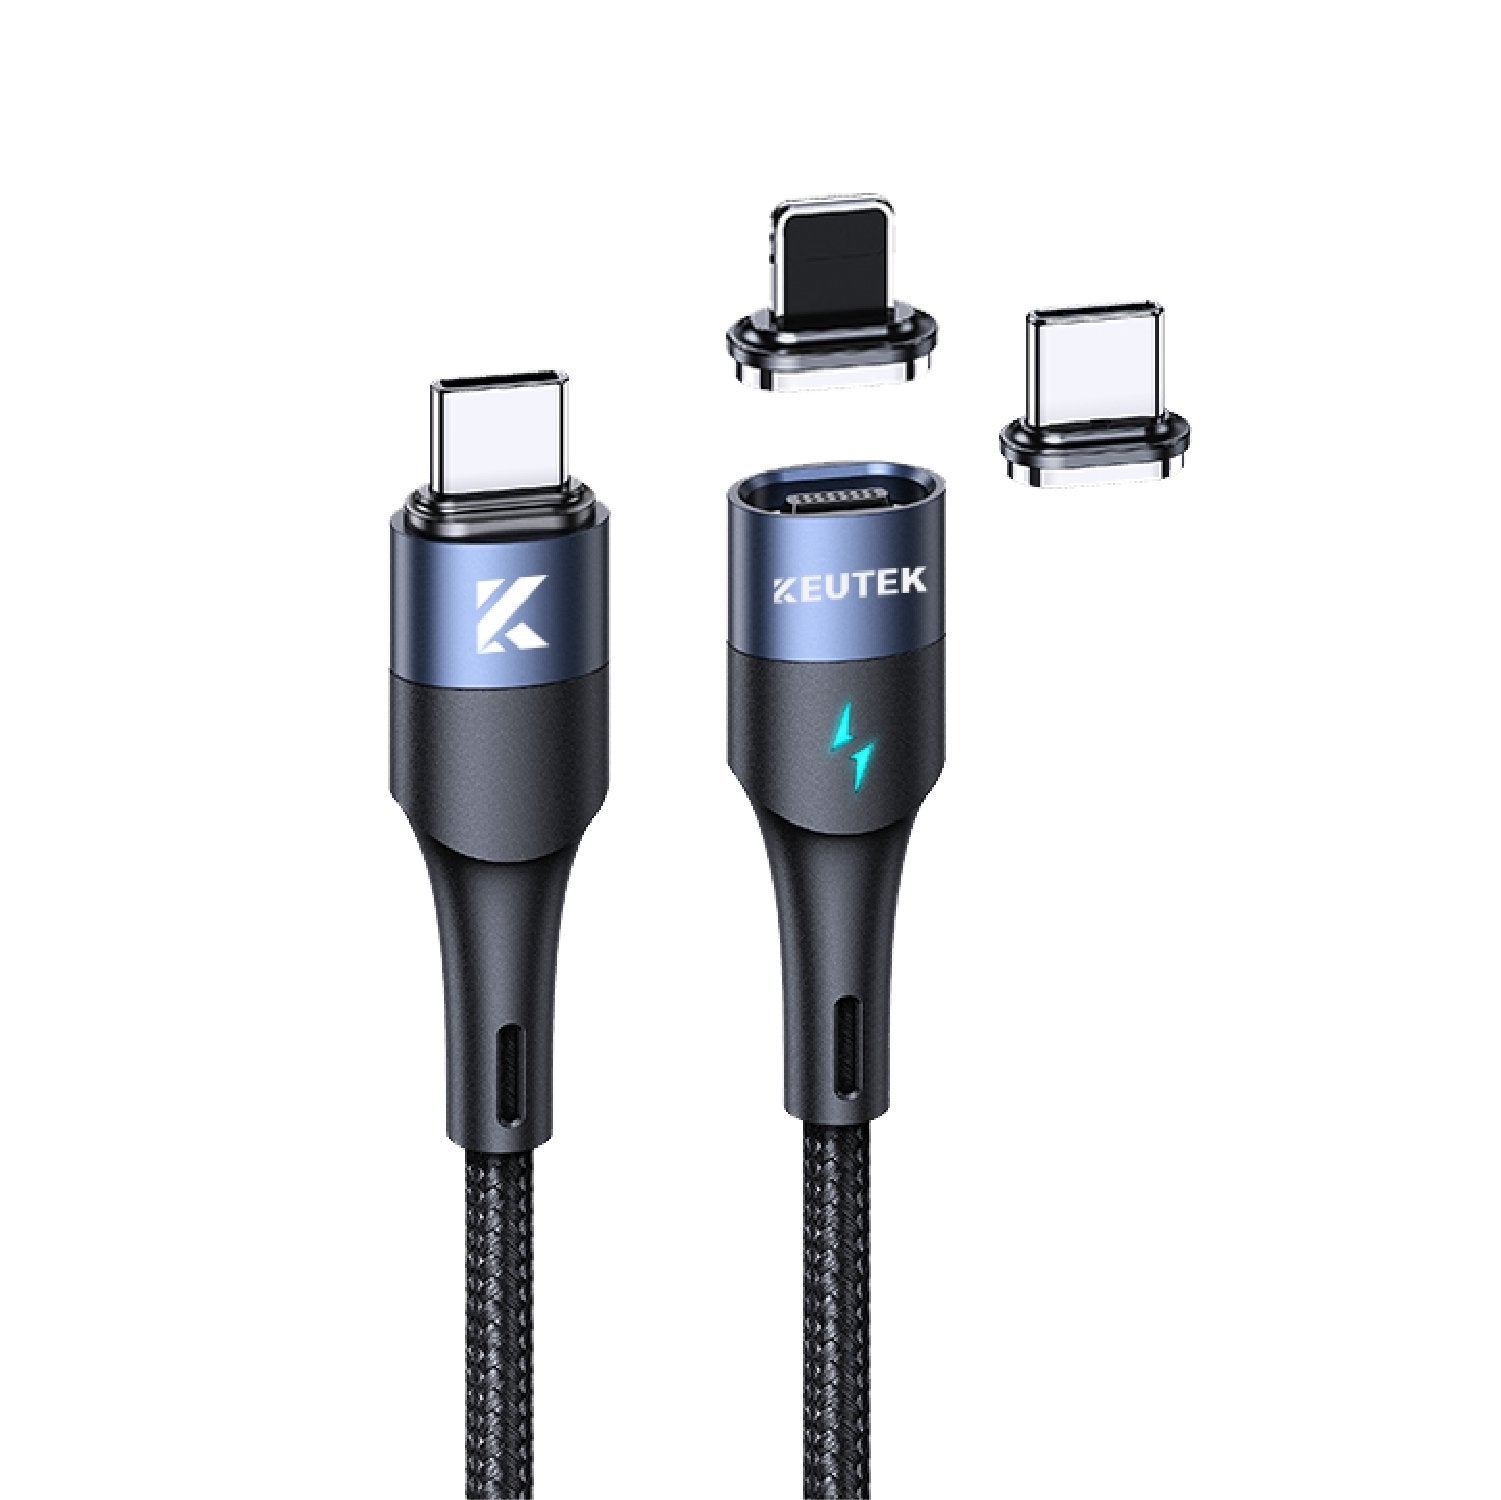 ProSeries Fast Charging Cable + Wall Charger Bundle | KEUTEK